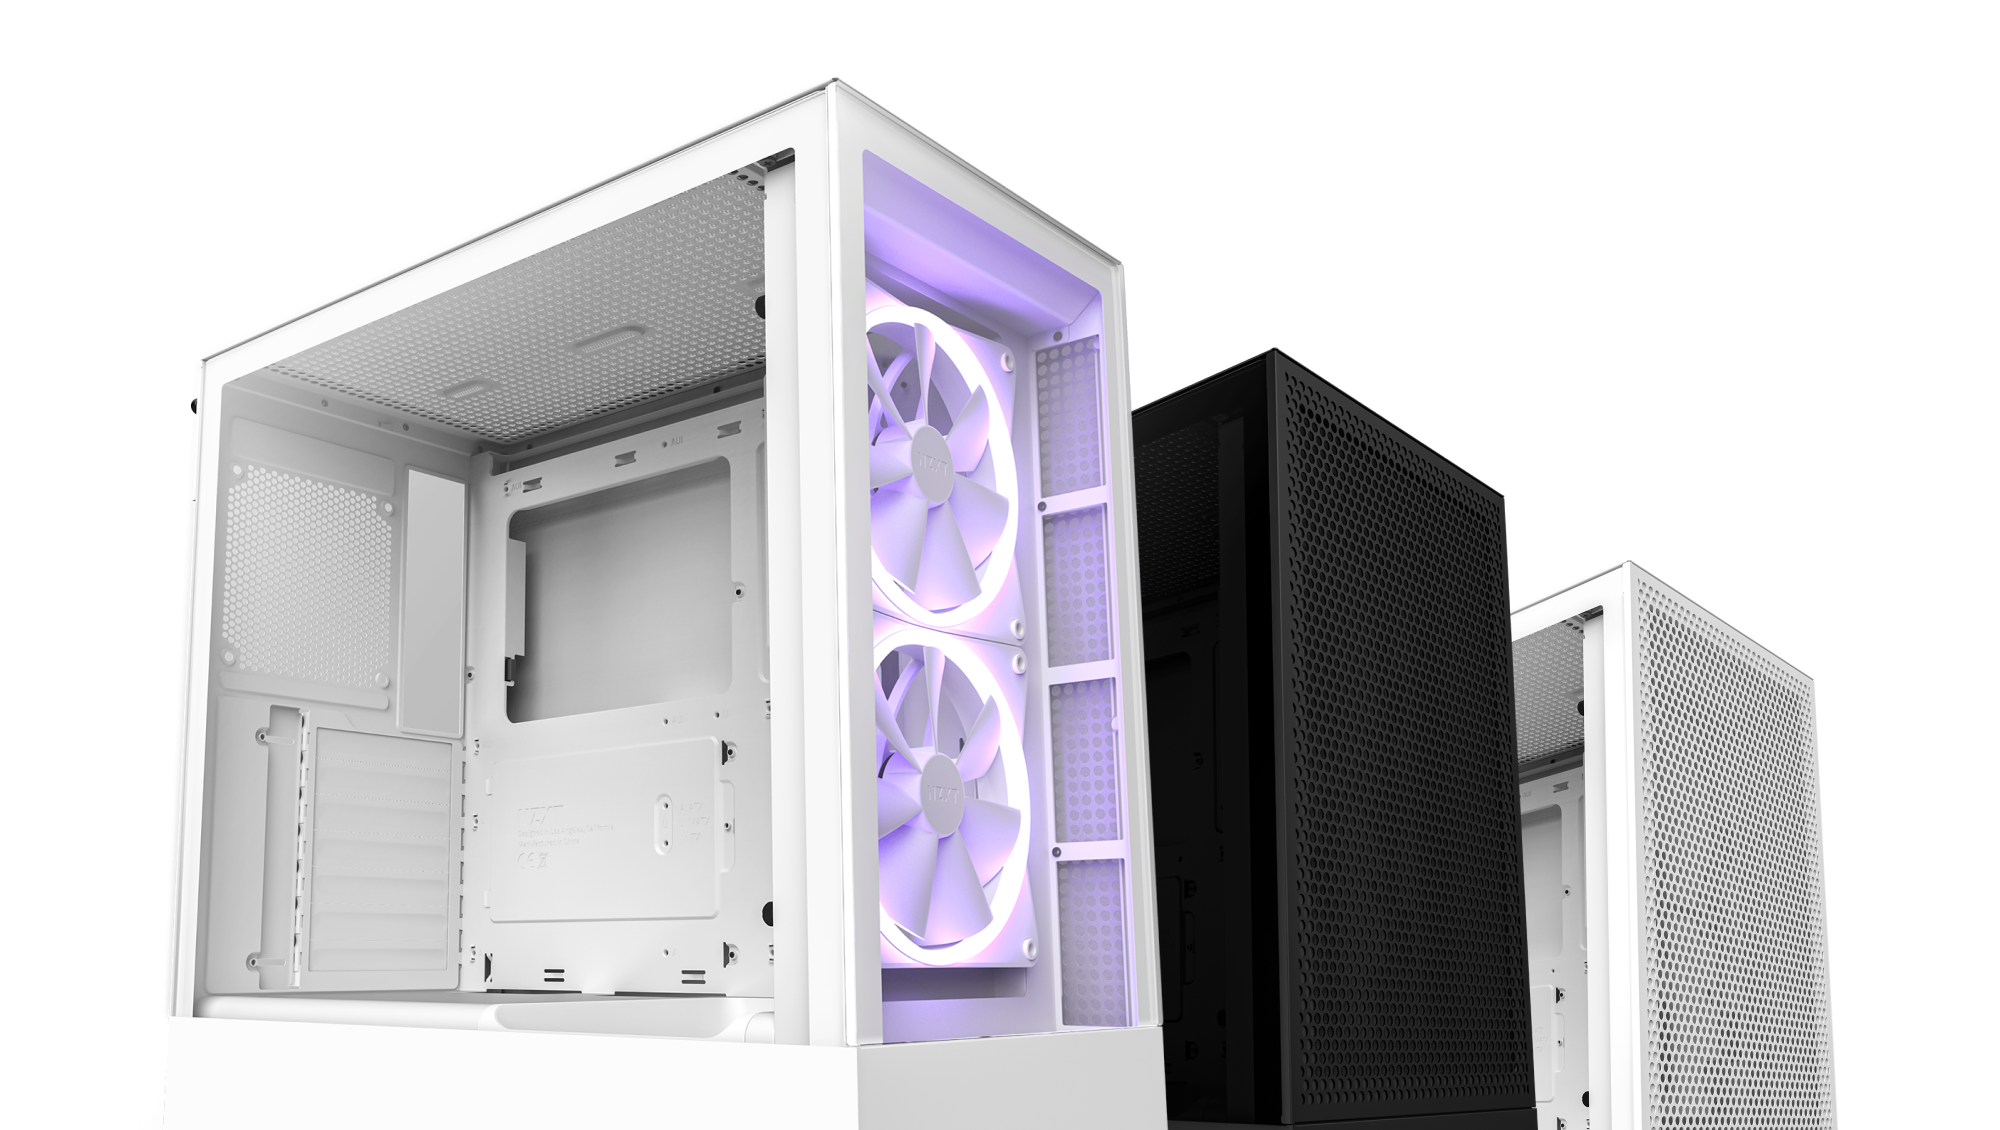 Nzxt Cam Pc Monitoring And Configuration Software Nzxt